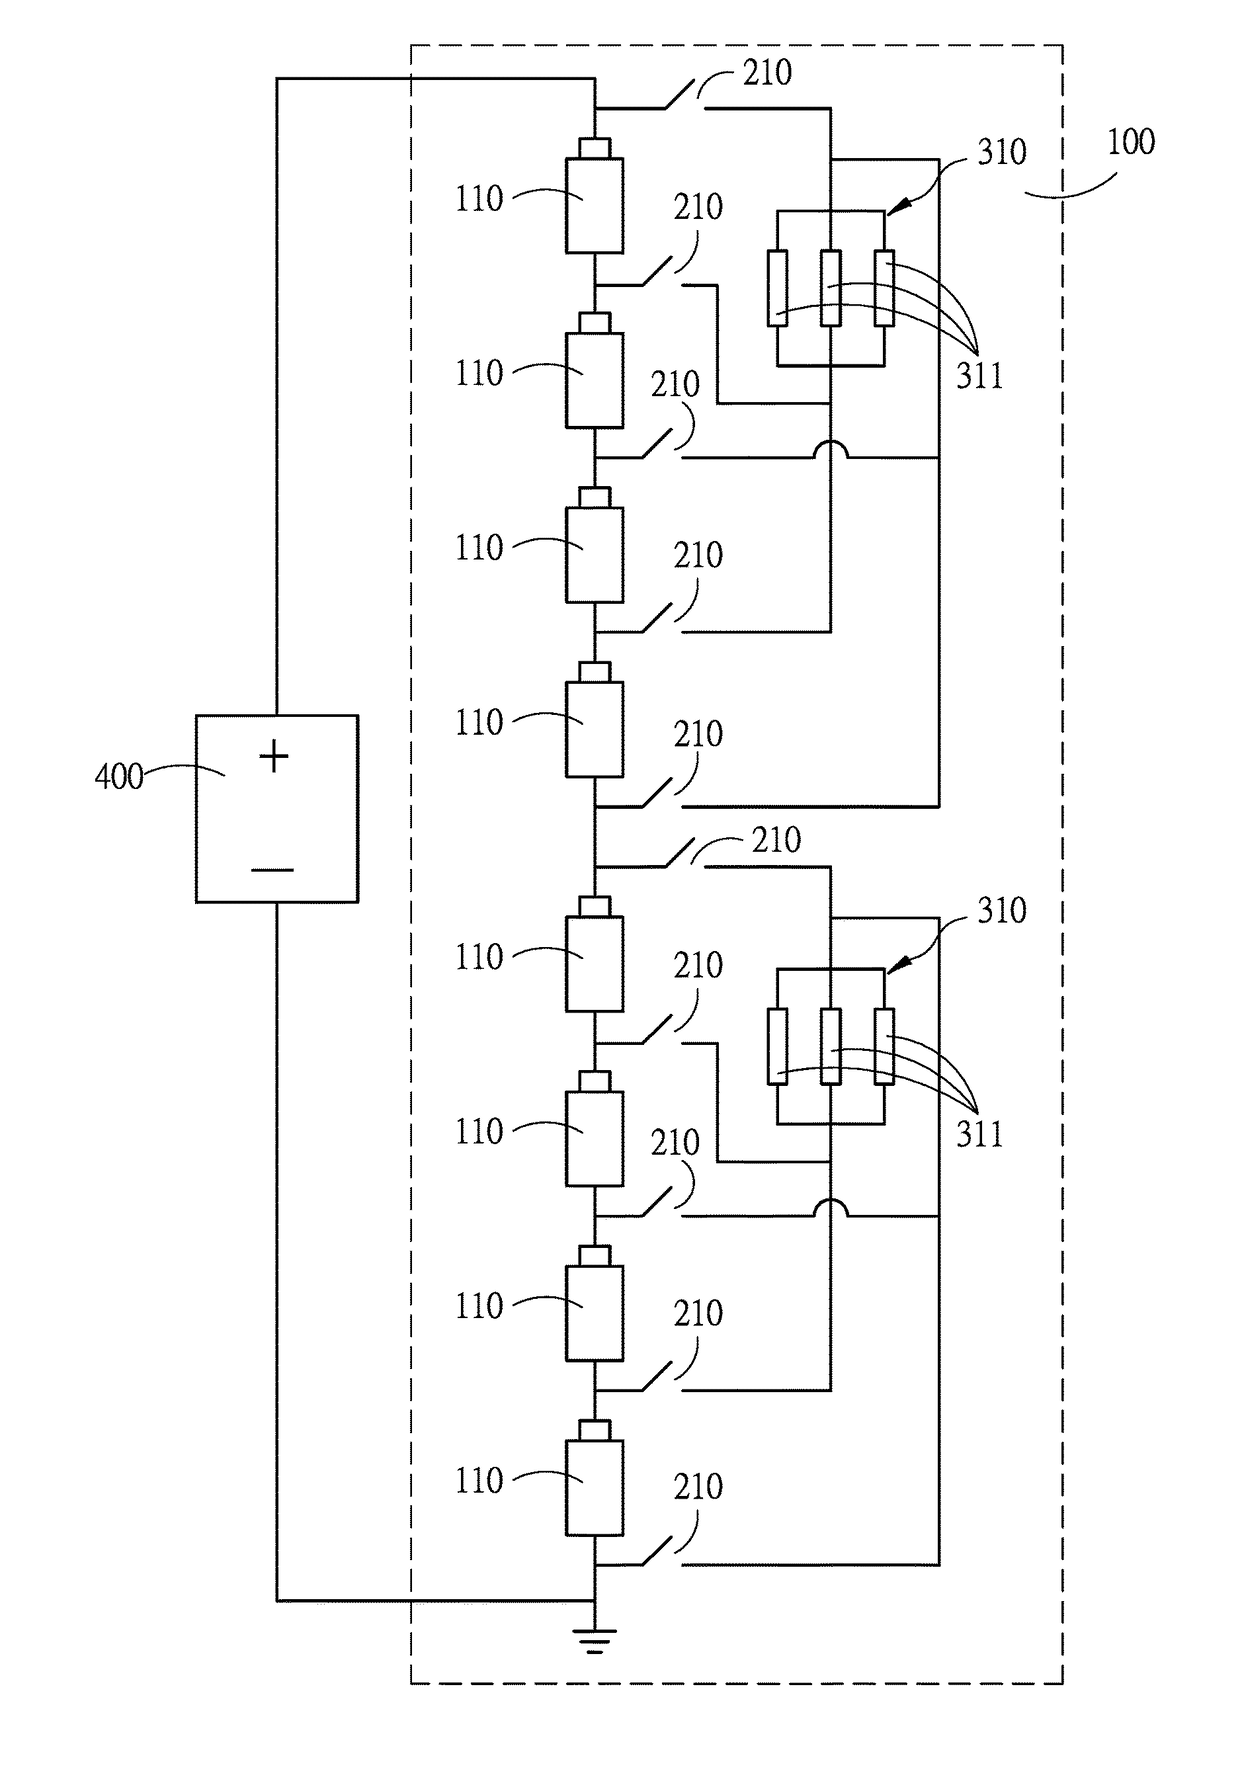 Battery charge-discharge balancing circuit assembly